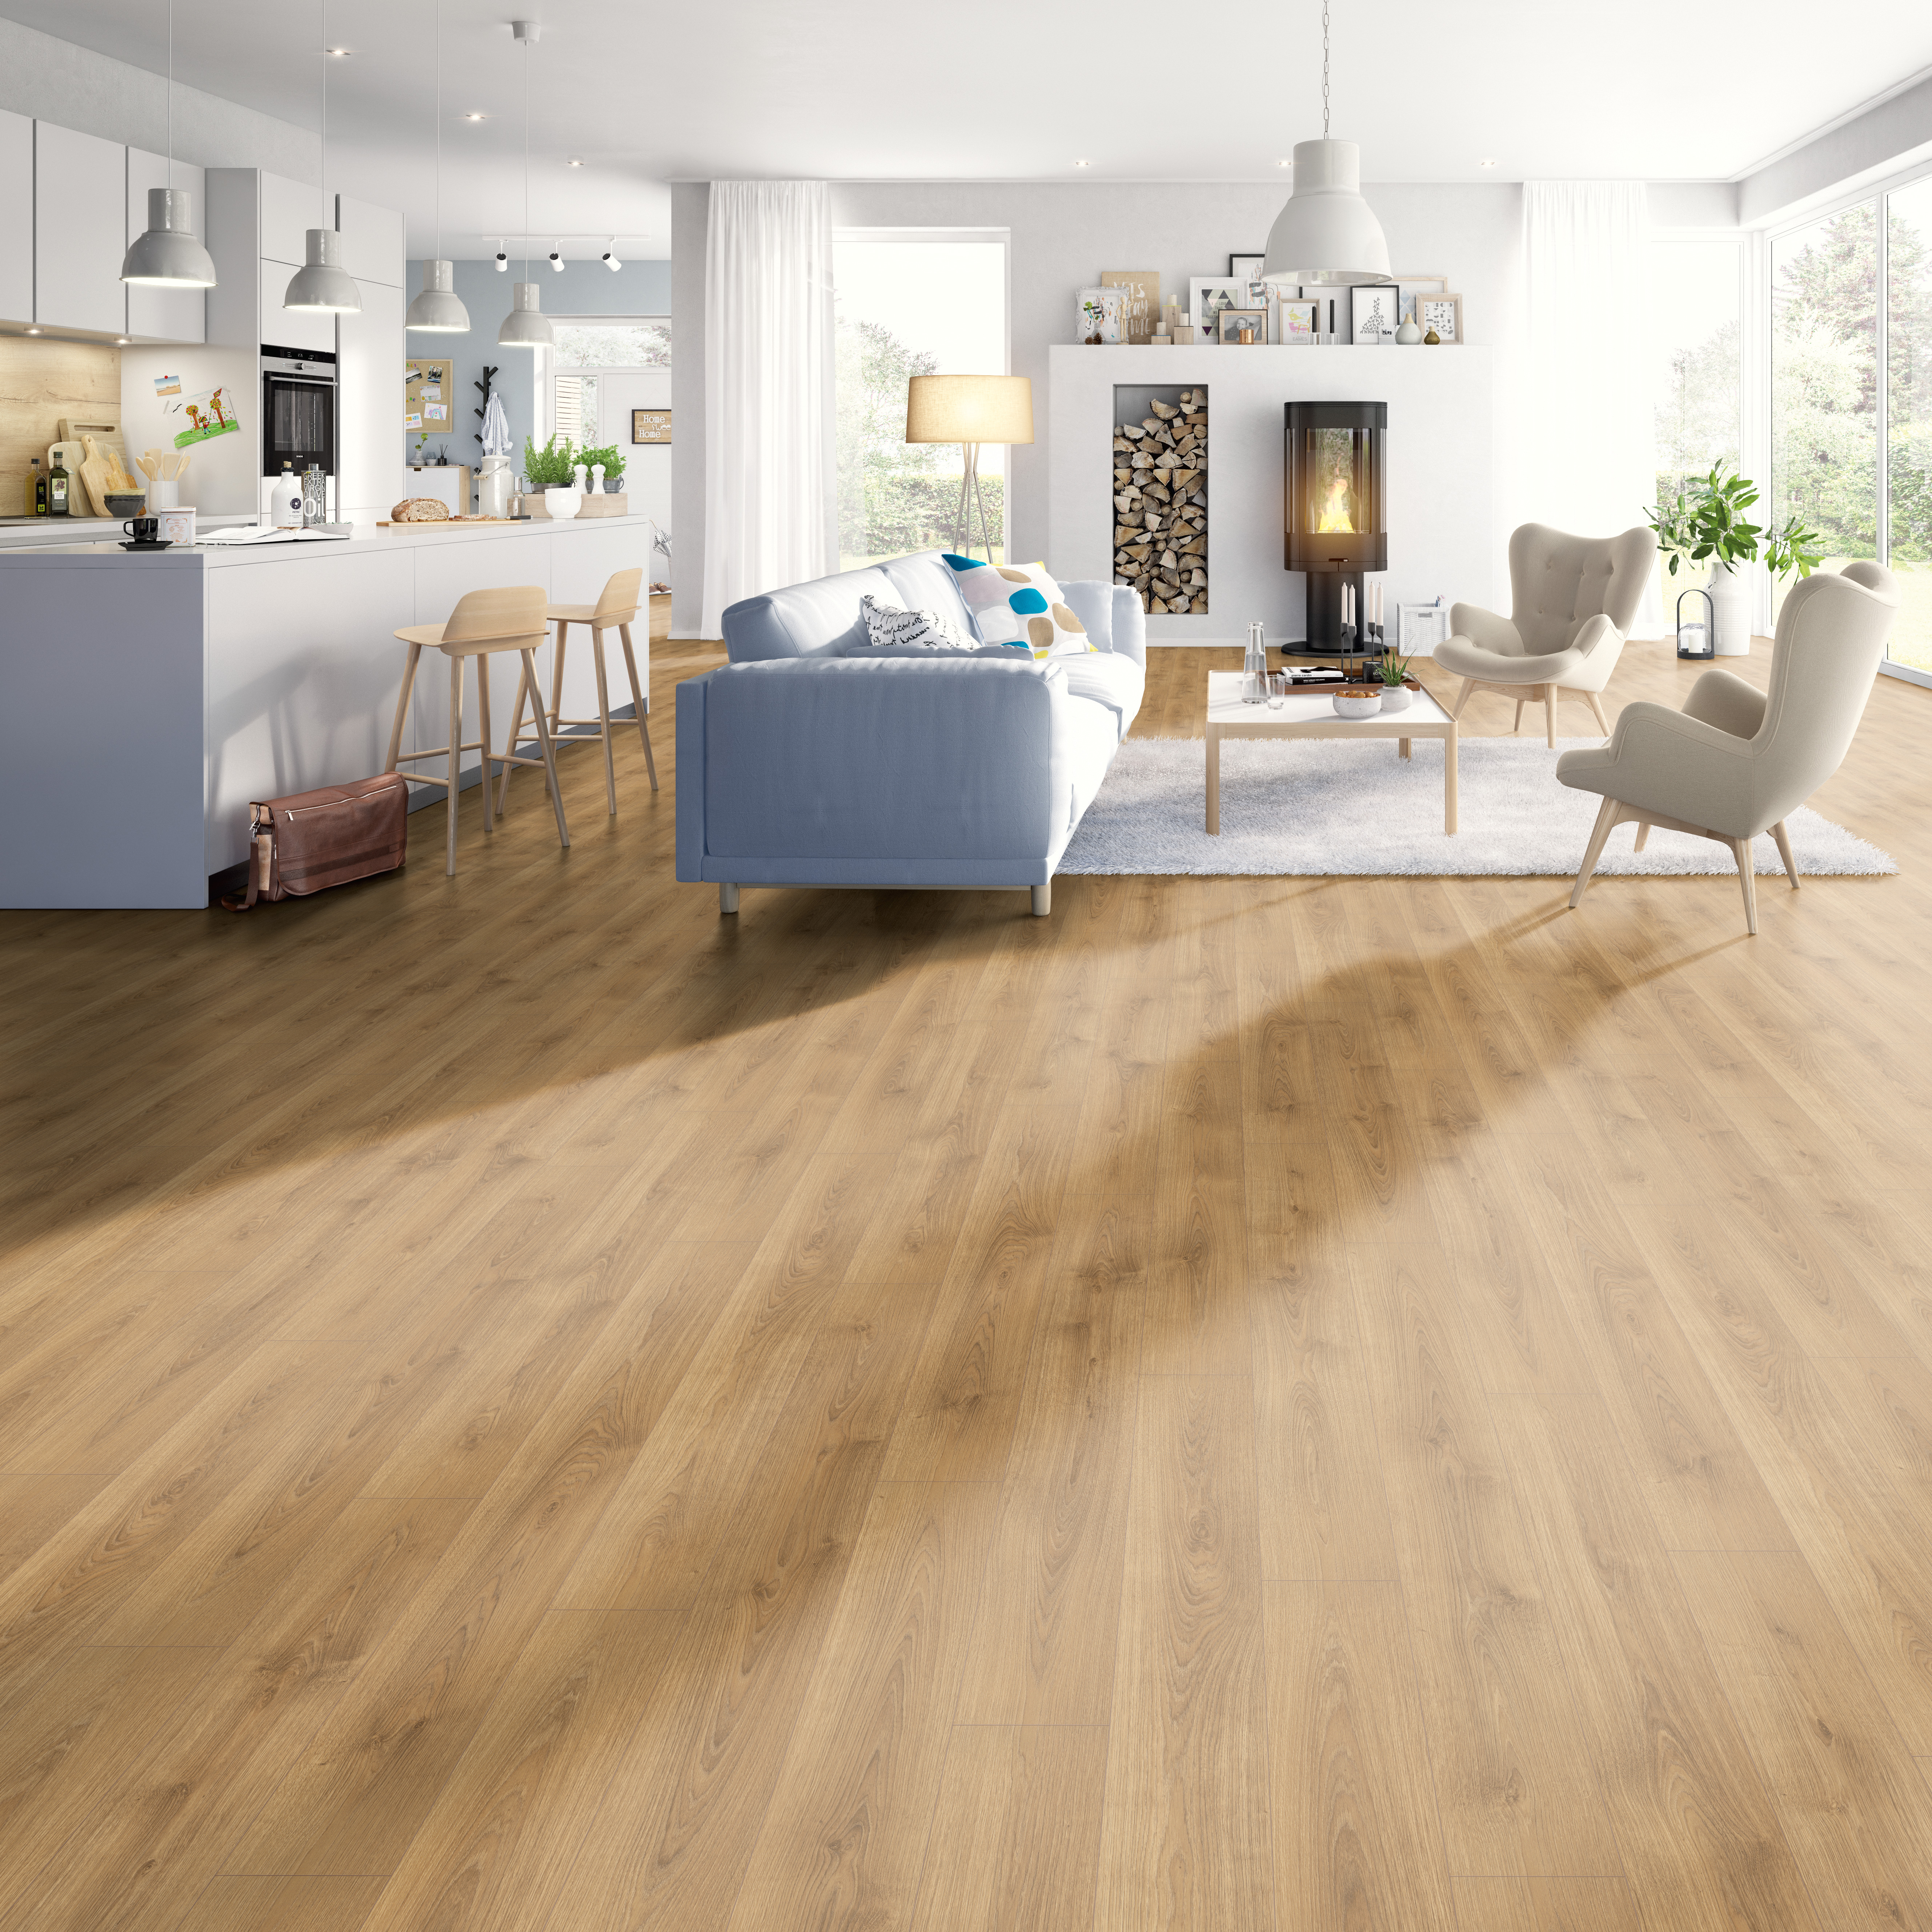 Install your flooring yourself with the EGGER HOME collection!